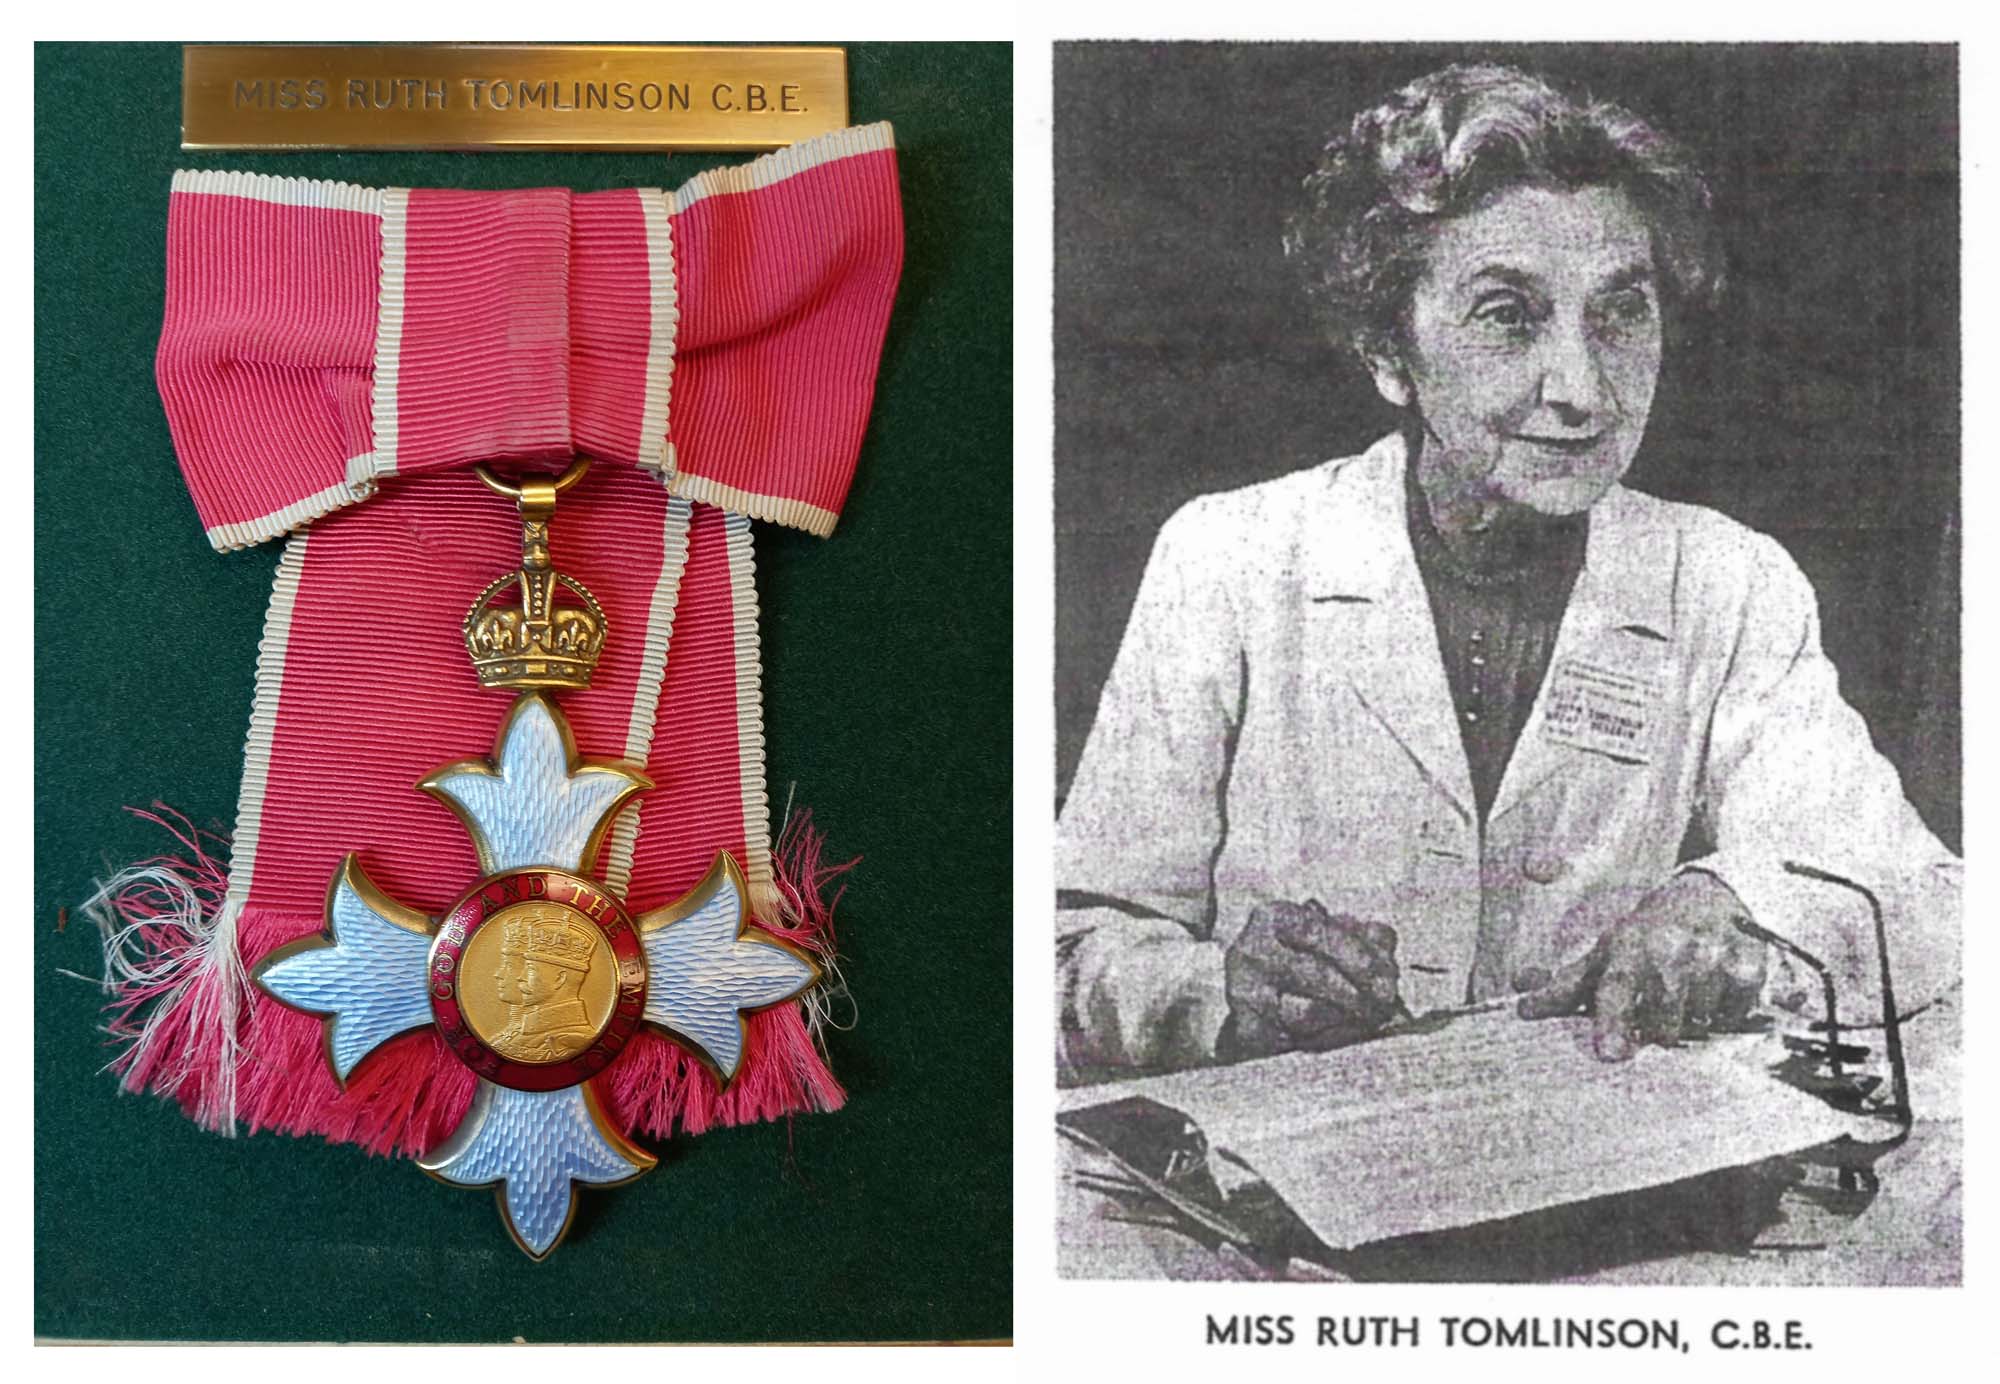 Miss Ruth Tomlinson and her CBE